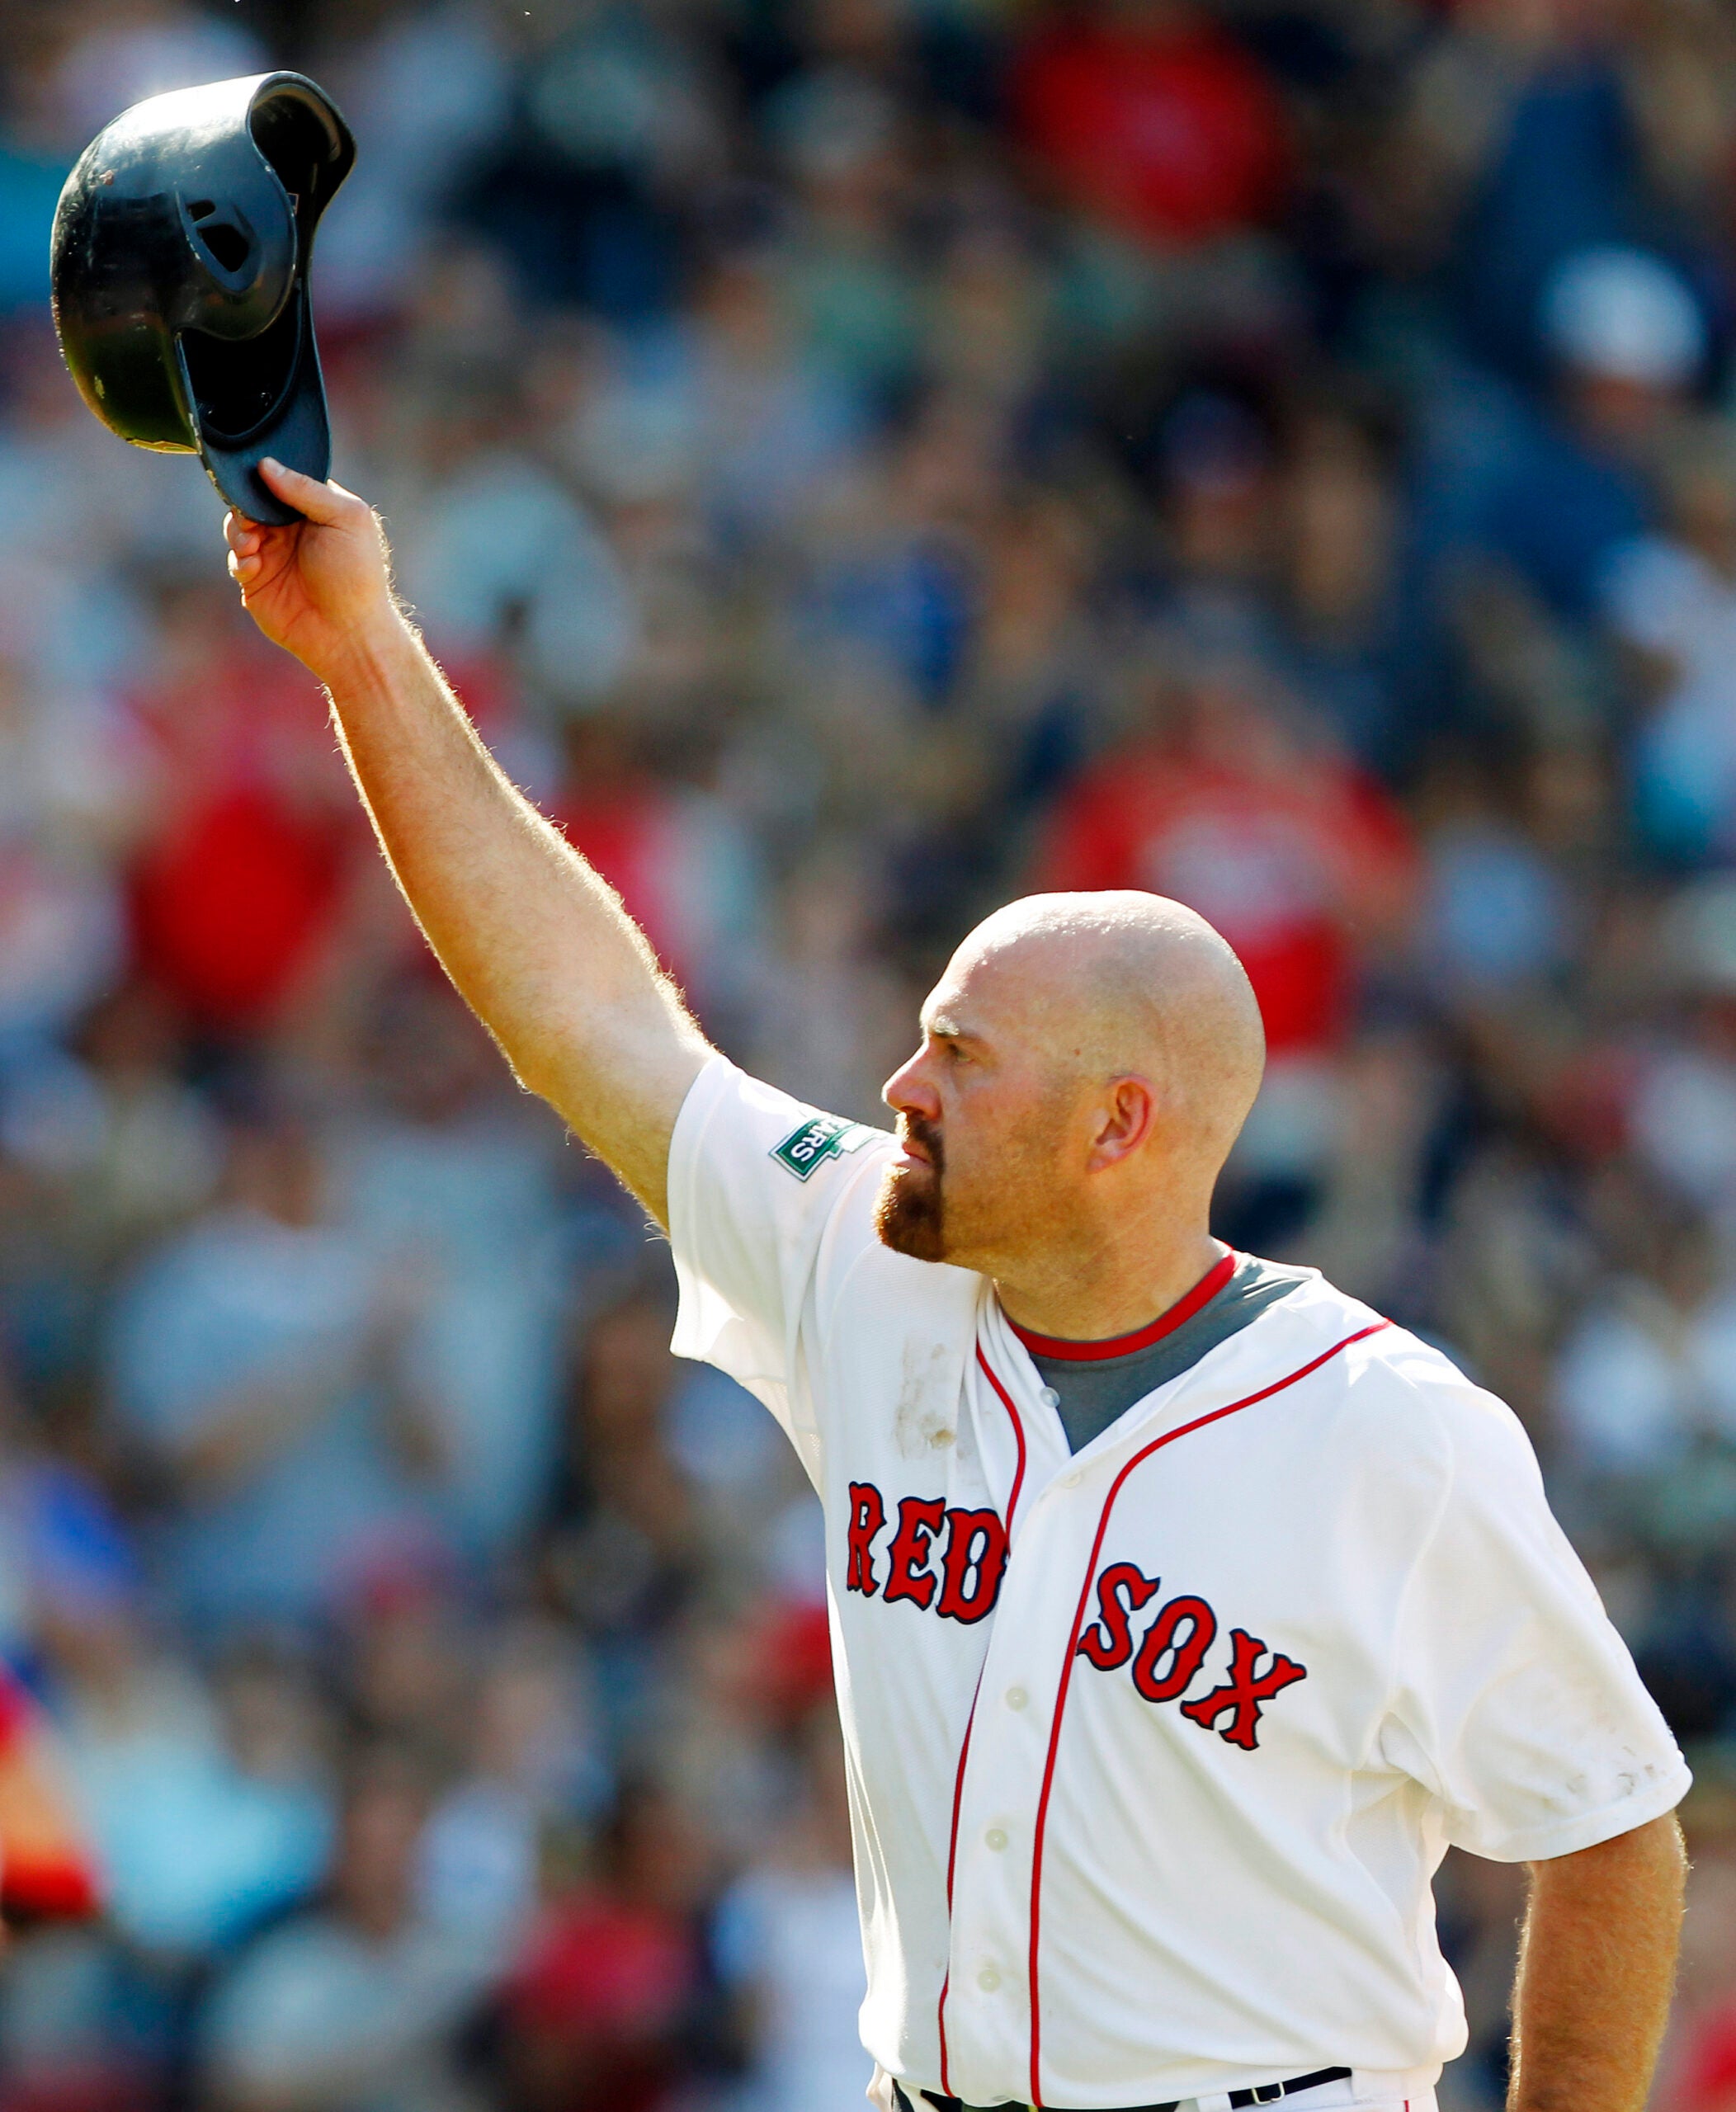 Kevin Youkilis's Jewish Roots Provoke Fascination - The New York Times